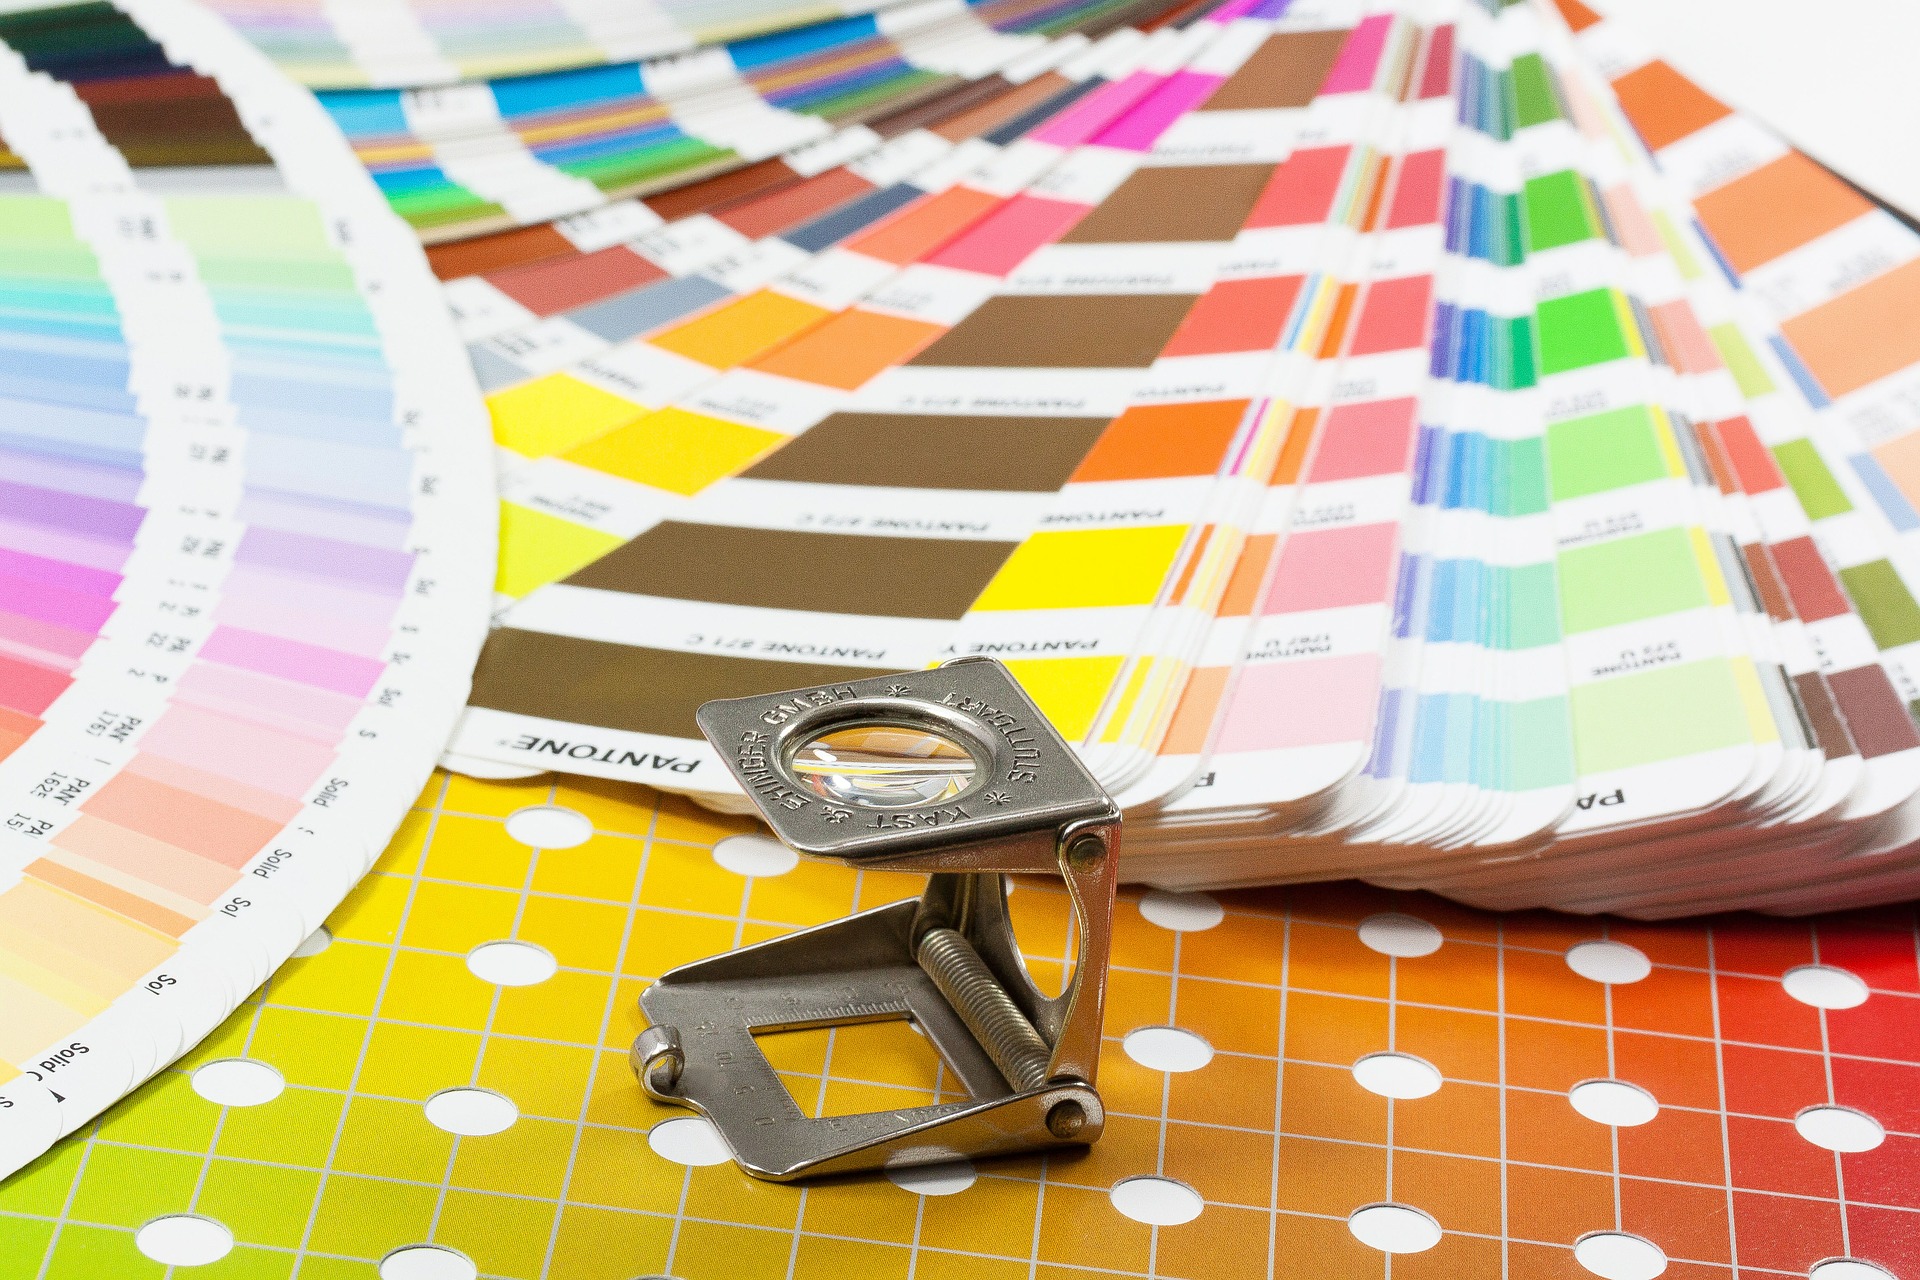 Here's what you should know about print and design for your business materials.